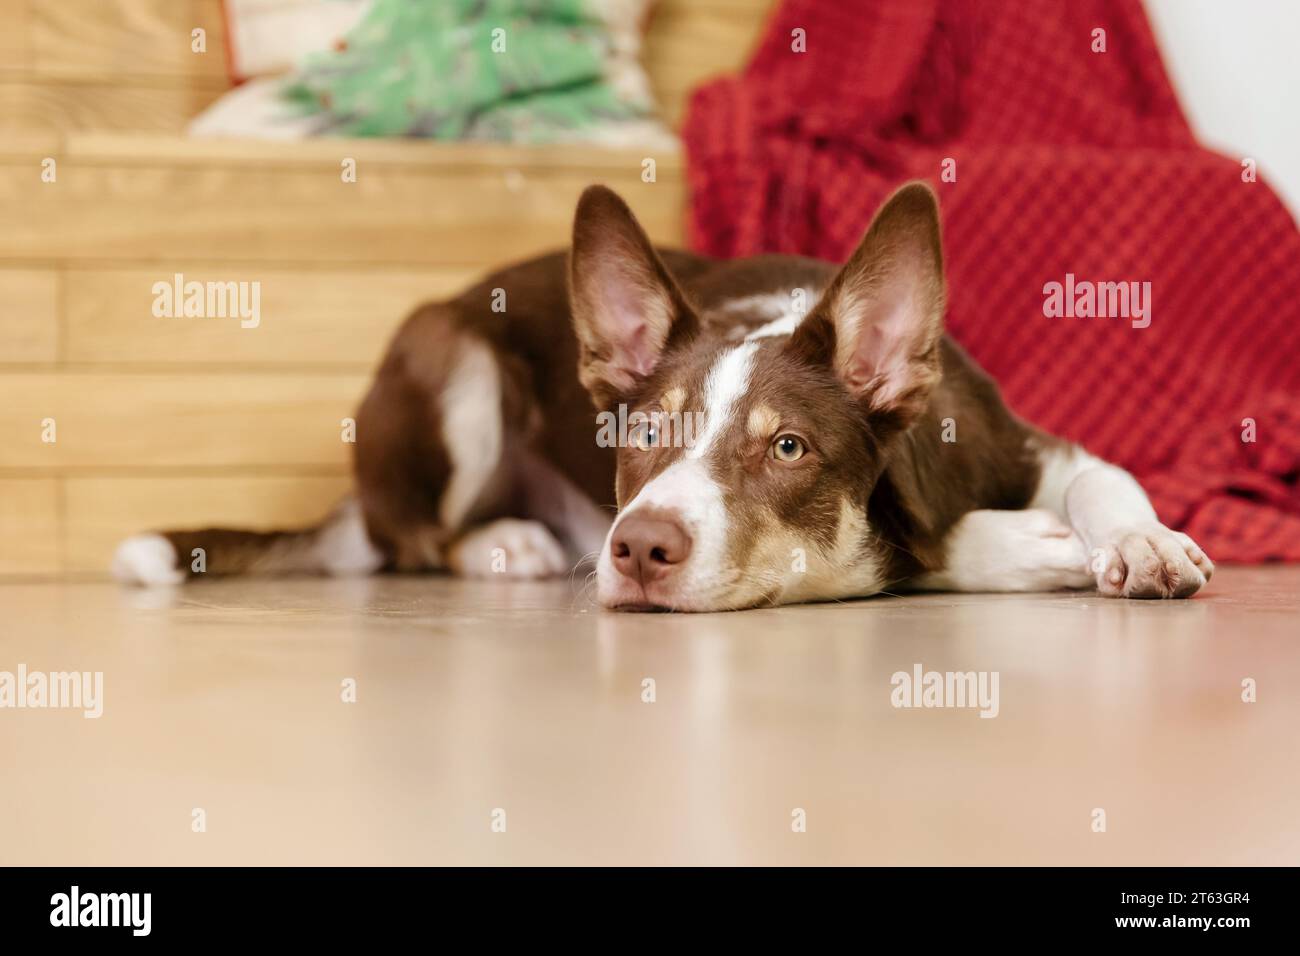 Border collie dog breed lying down at home. Cozy interior. Pet friendly. Domestic dog Stock Photo